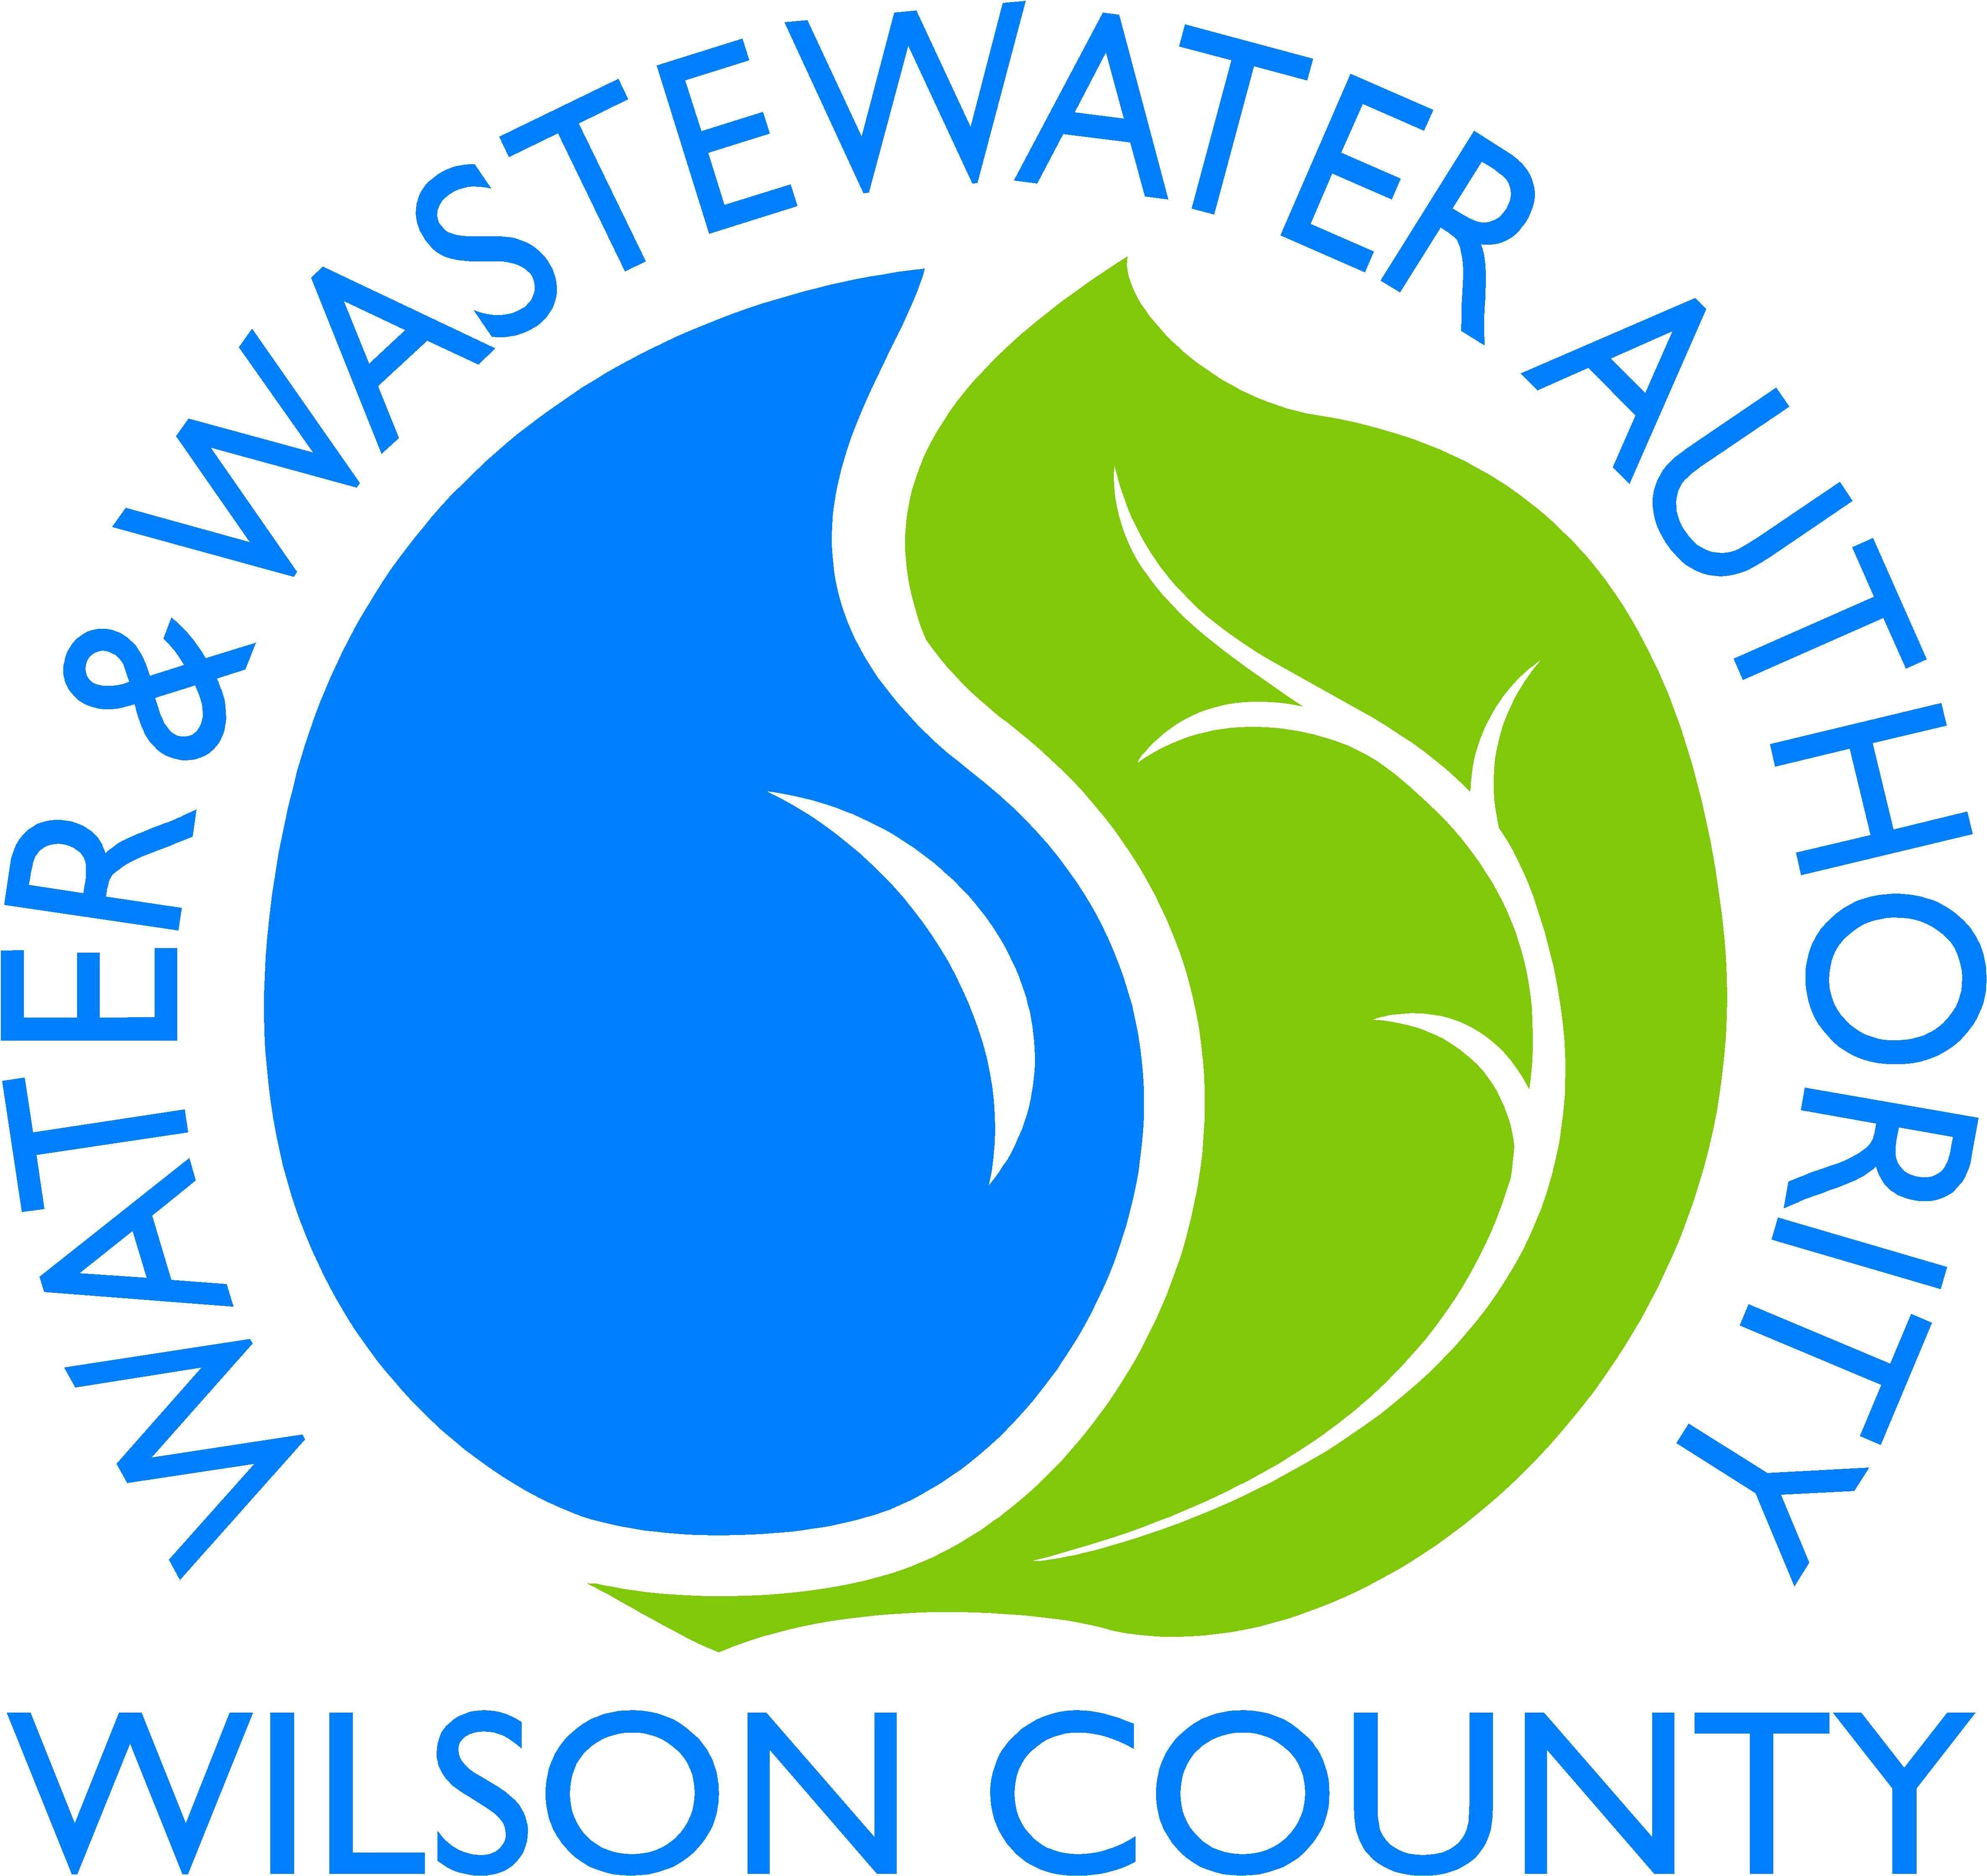 Wastewater Logo - Water & Wastewater Authority of Wilson County